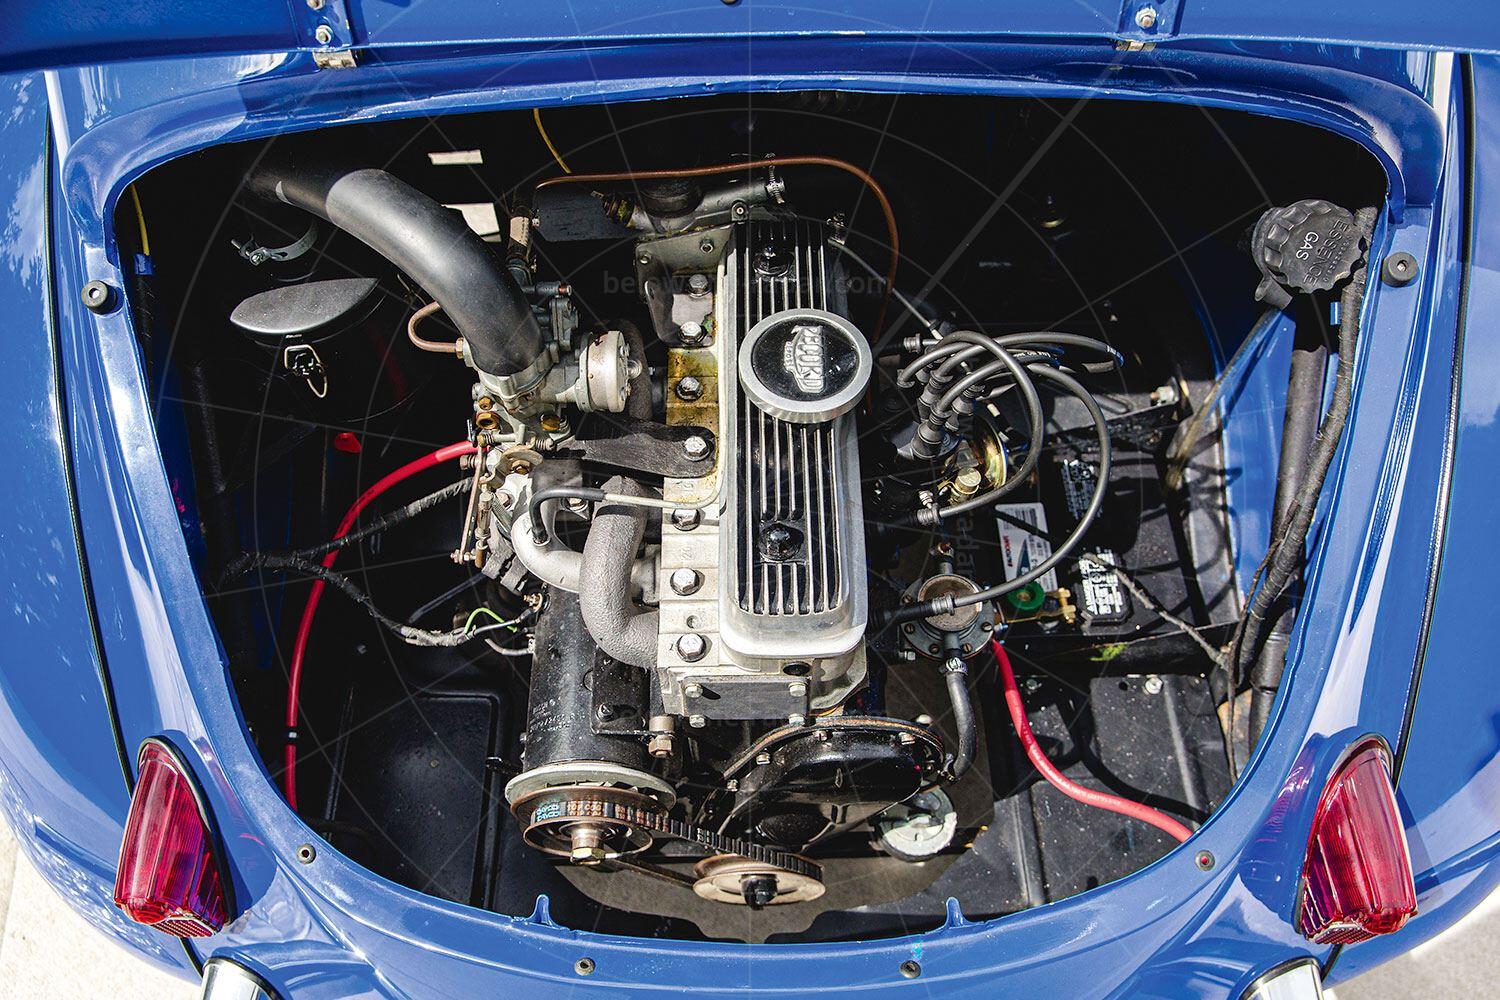 Renault 4CV Jolly engine bay Pic: RM Sotheby's | Renault 4CV Jolly engine bay